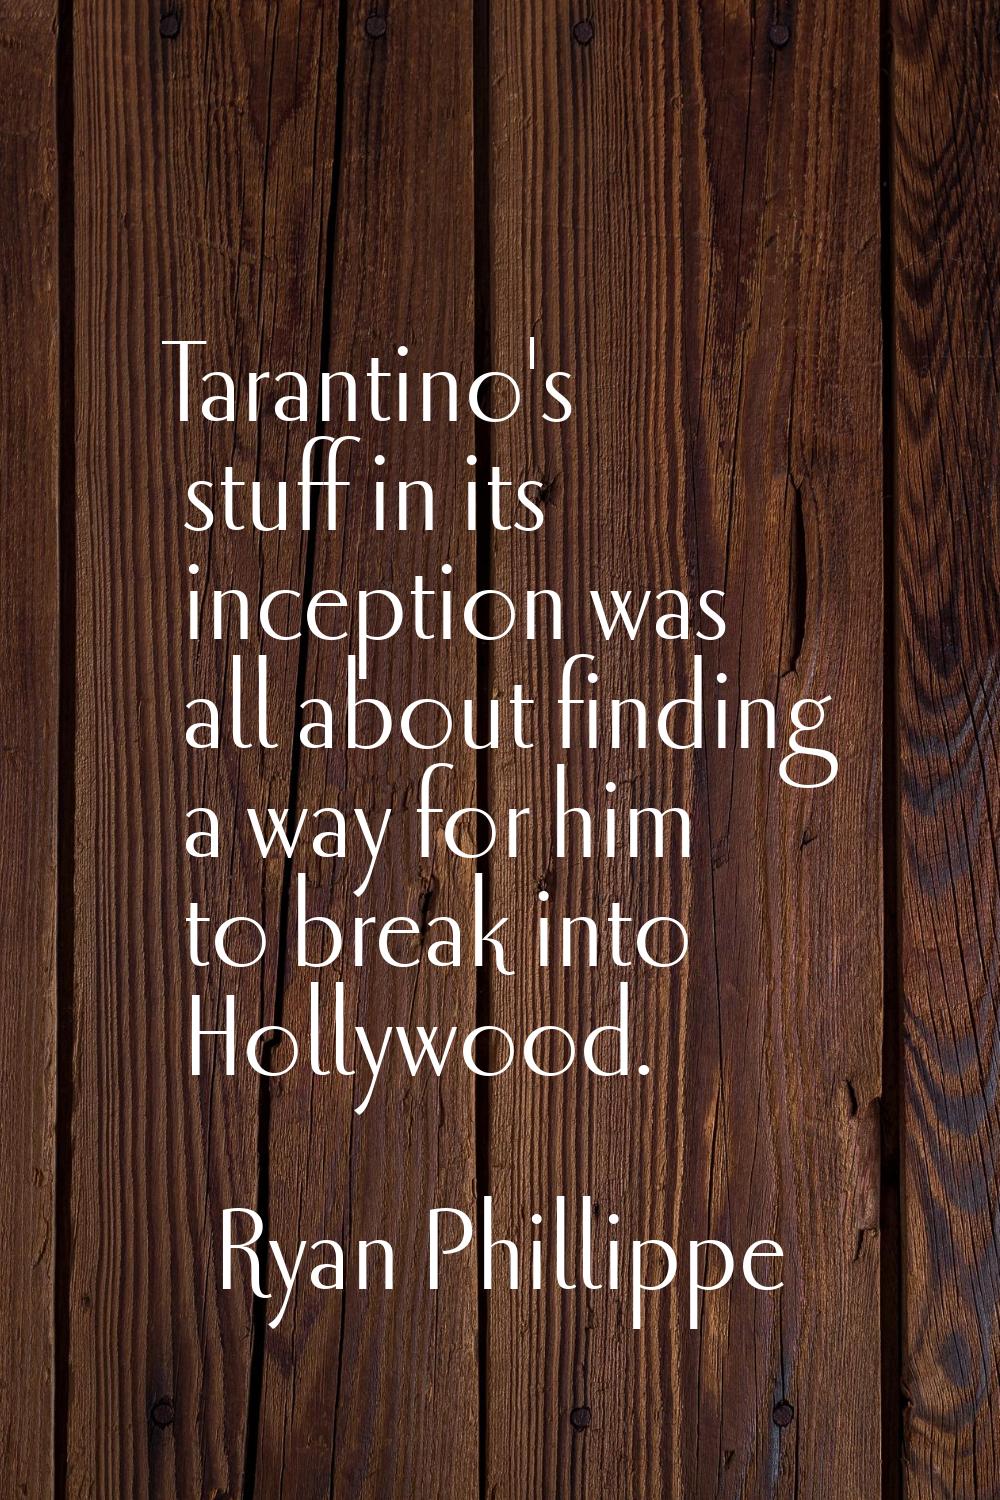 Tarantino's stuff in its inception was all about finding a way for him to break into Hollywood.